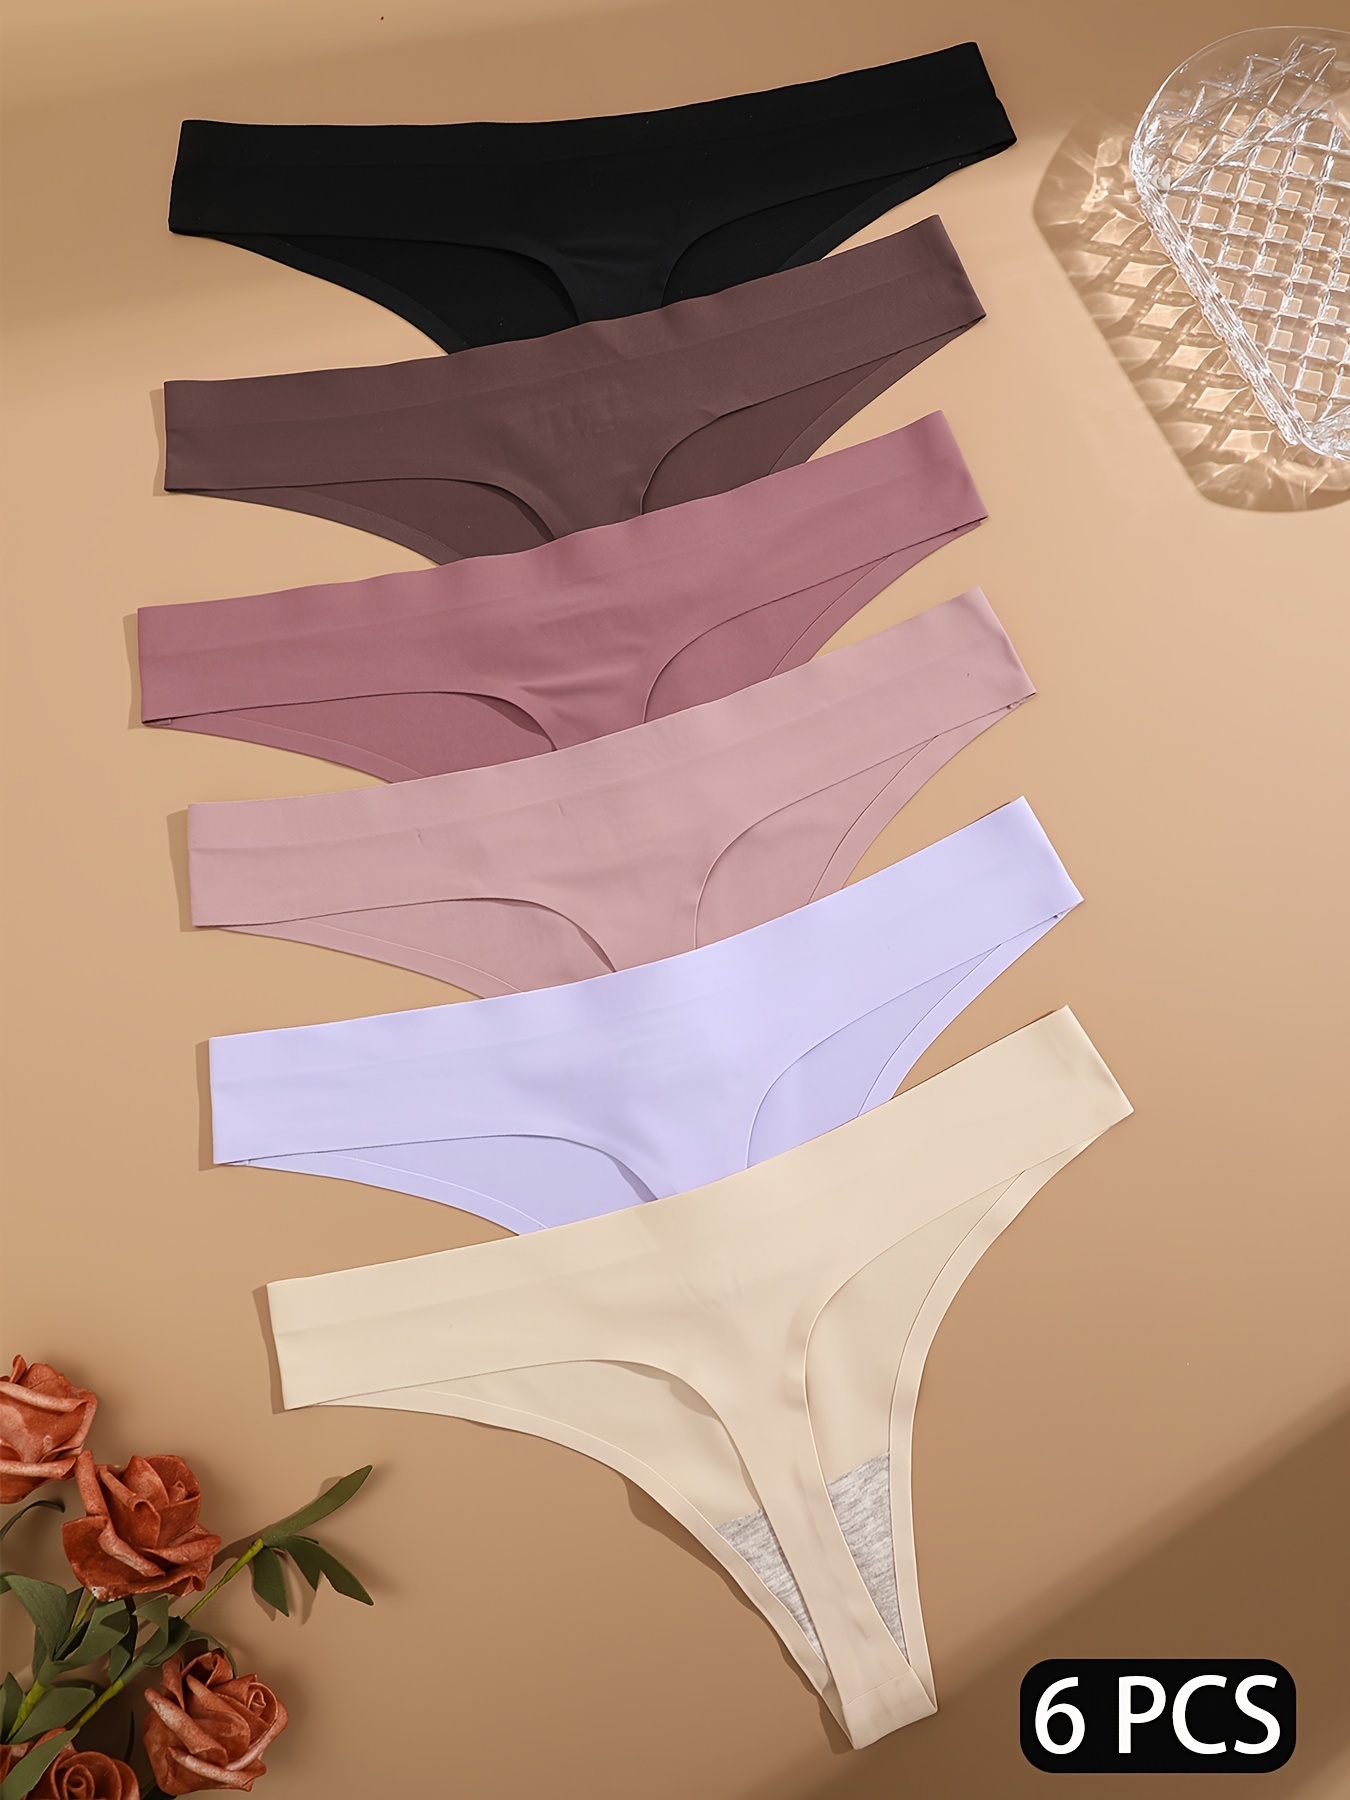 Seamless Ring Linked Thongs, Soft & Comfy Stretchy Intimates Panties,  Women's Lingerie & Underwear